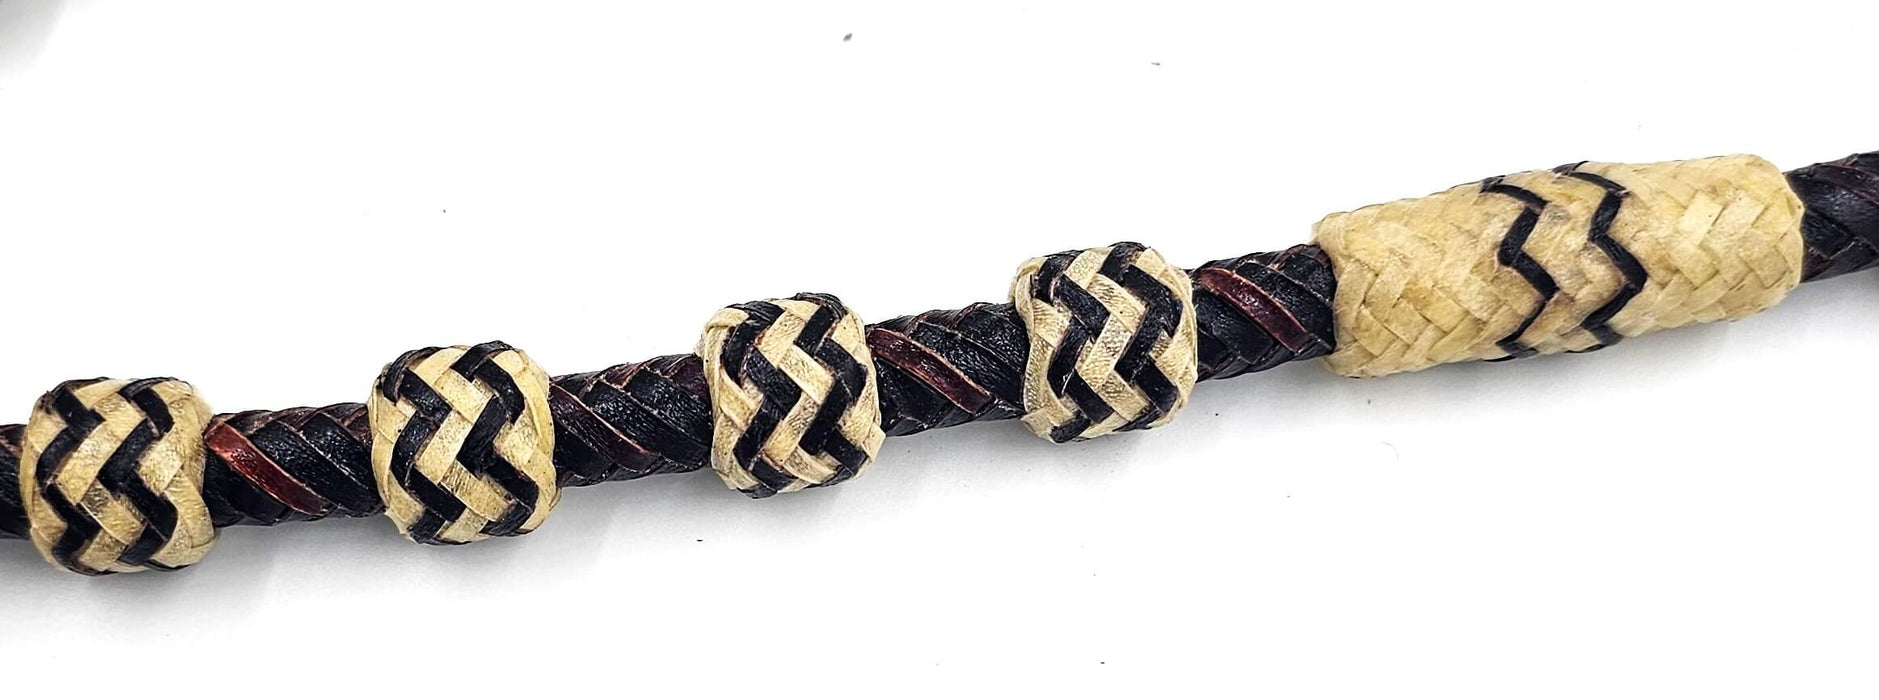 Braided Black Rawhide reins with white toned buttons and leather popper ends